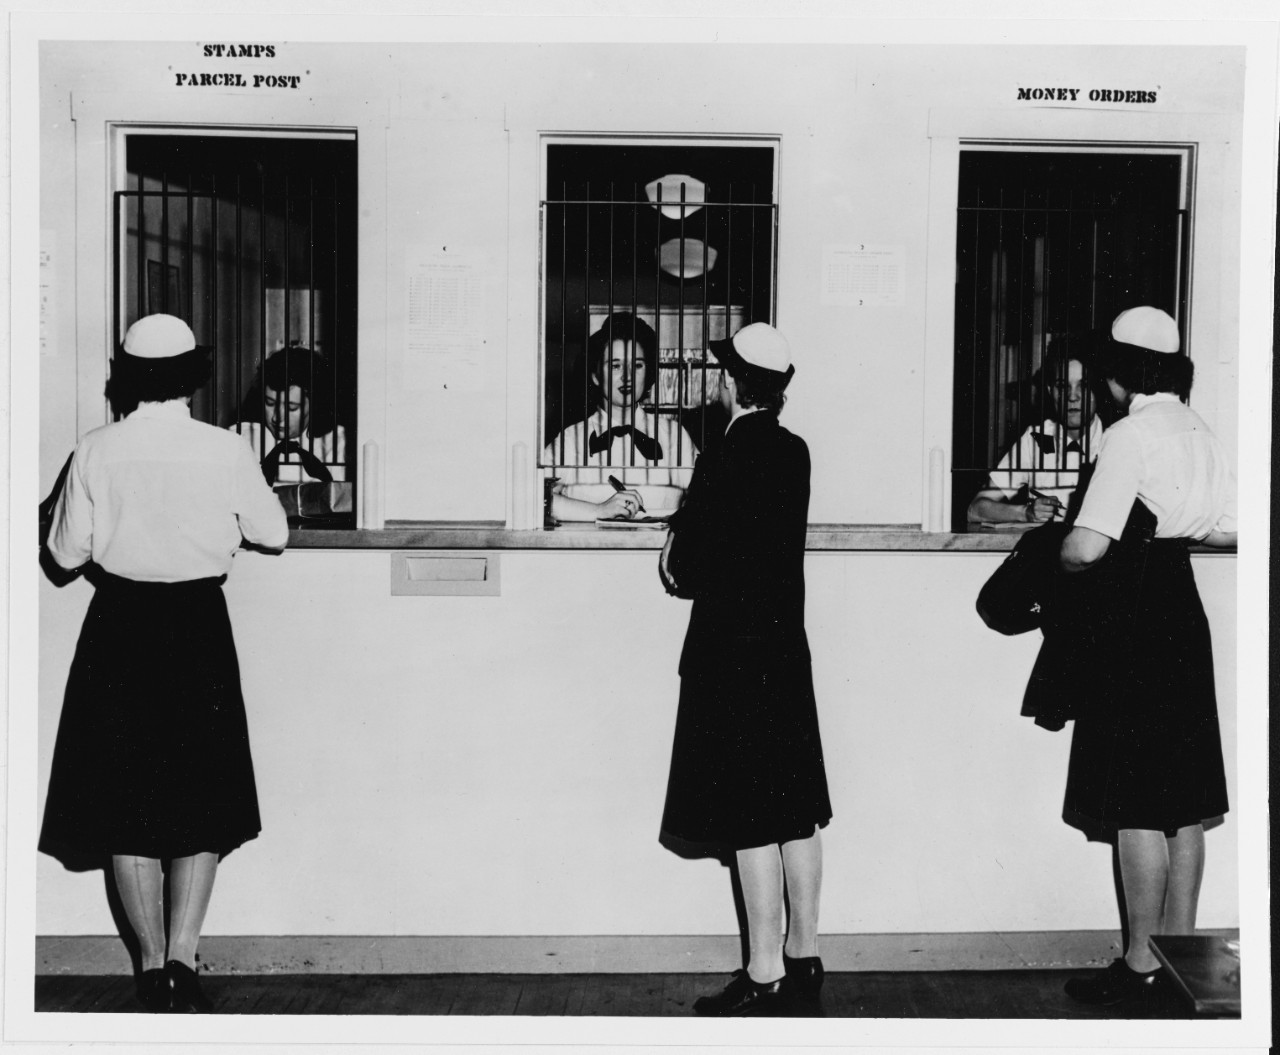 First Post Office of its size in U.S. history entirely staffed by women